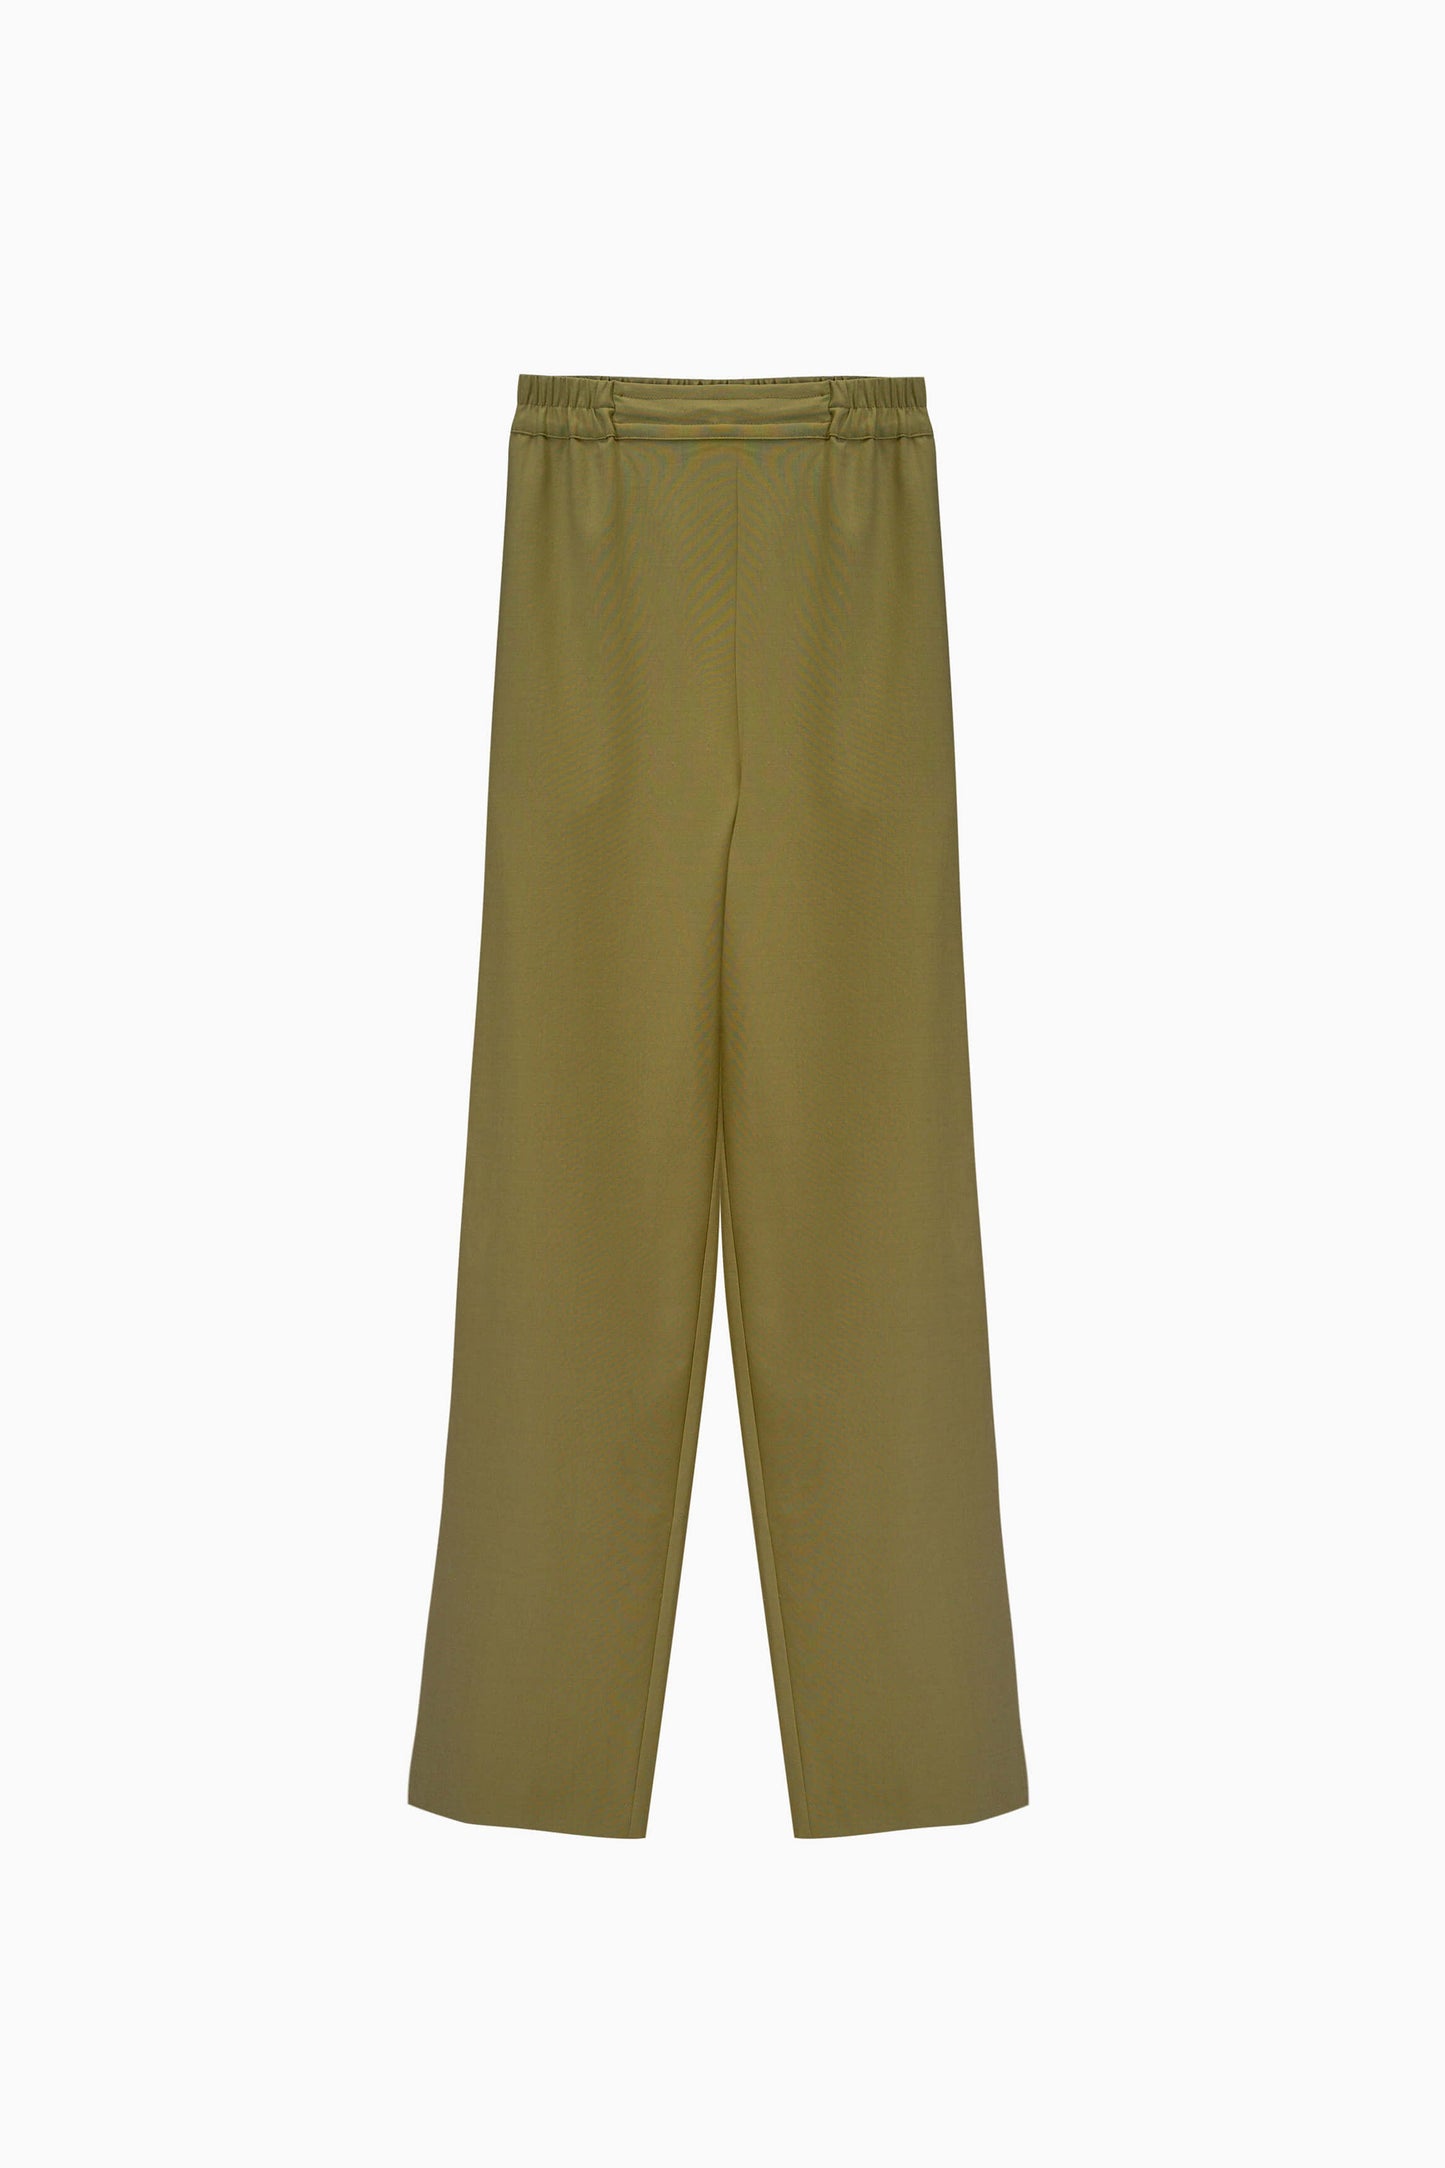 Off the Duty Pants with Piping in Black